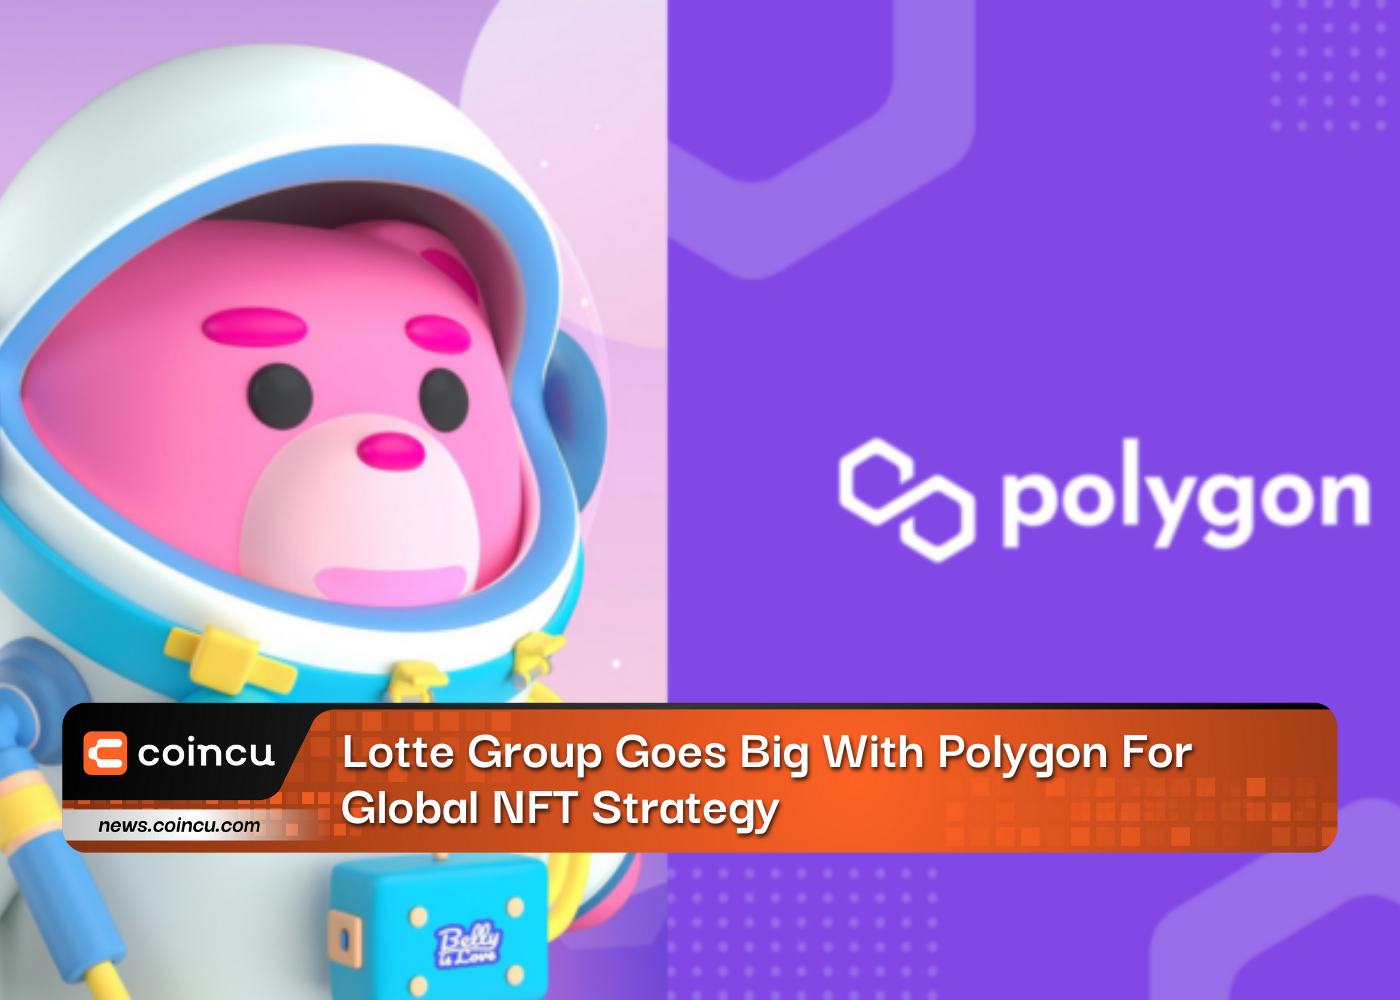 Lotte Group Goes Big With Polygon For Global NFT Strategy